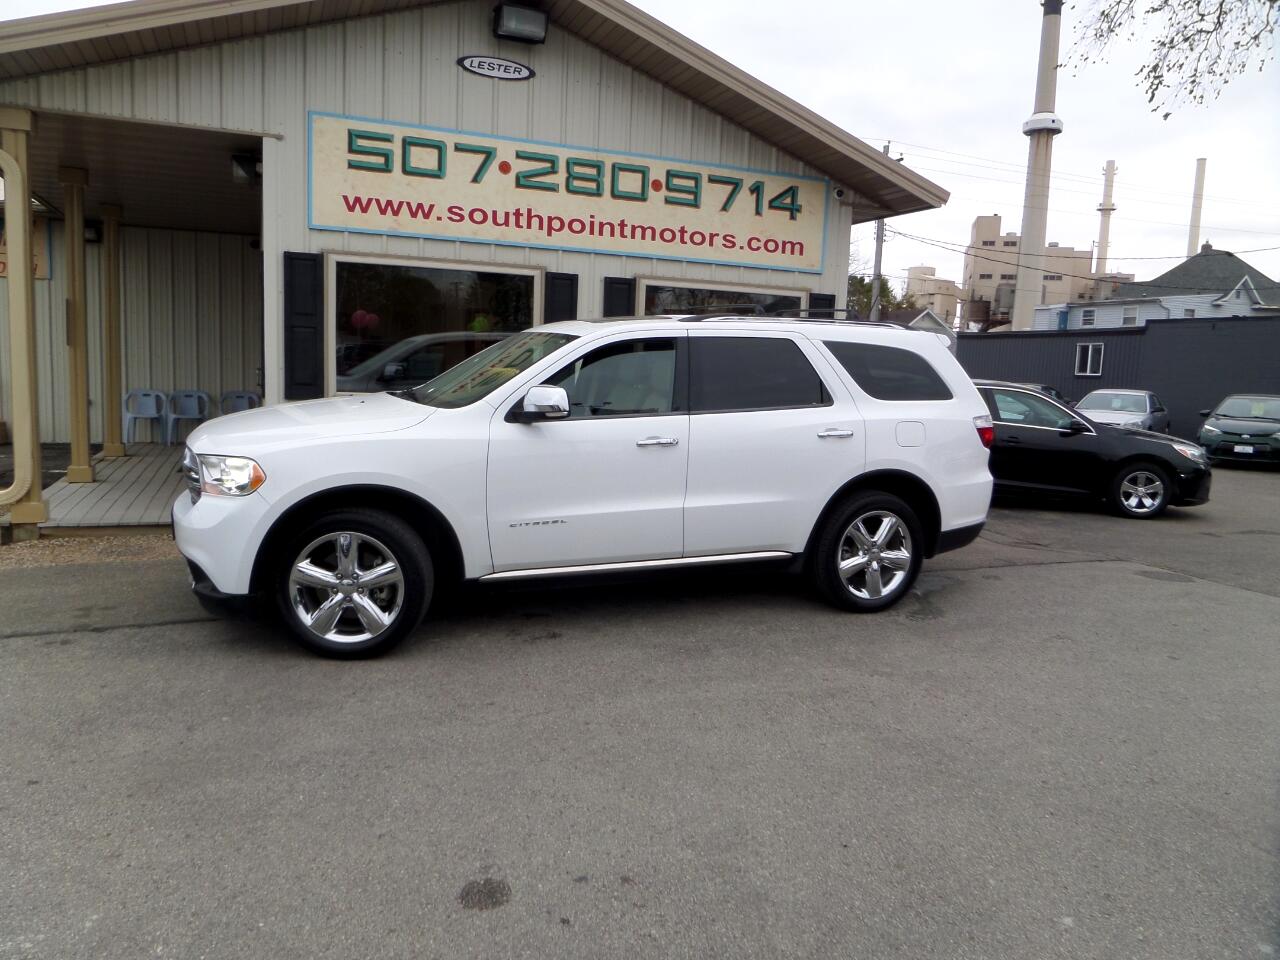 Used 2013 Dodge Durango Citadel Awd For Sale In Rochester Mn